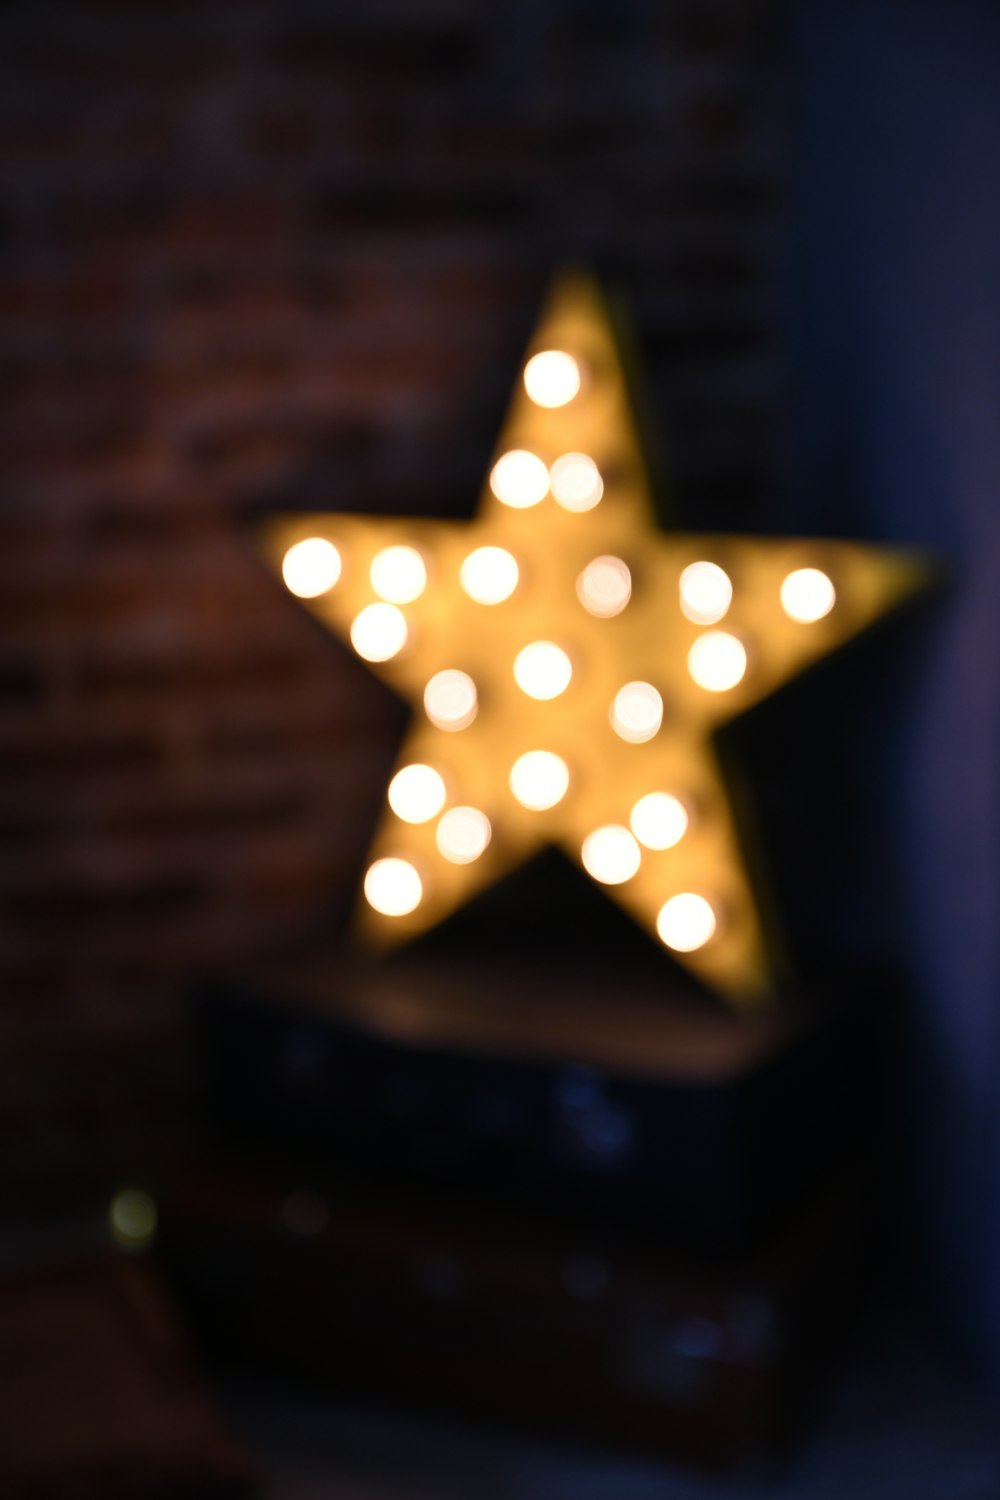 gold star ornament on brown wooden table